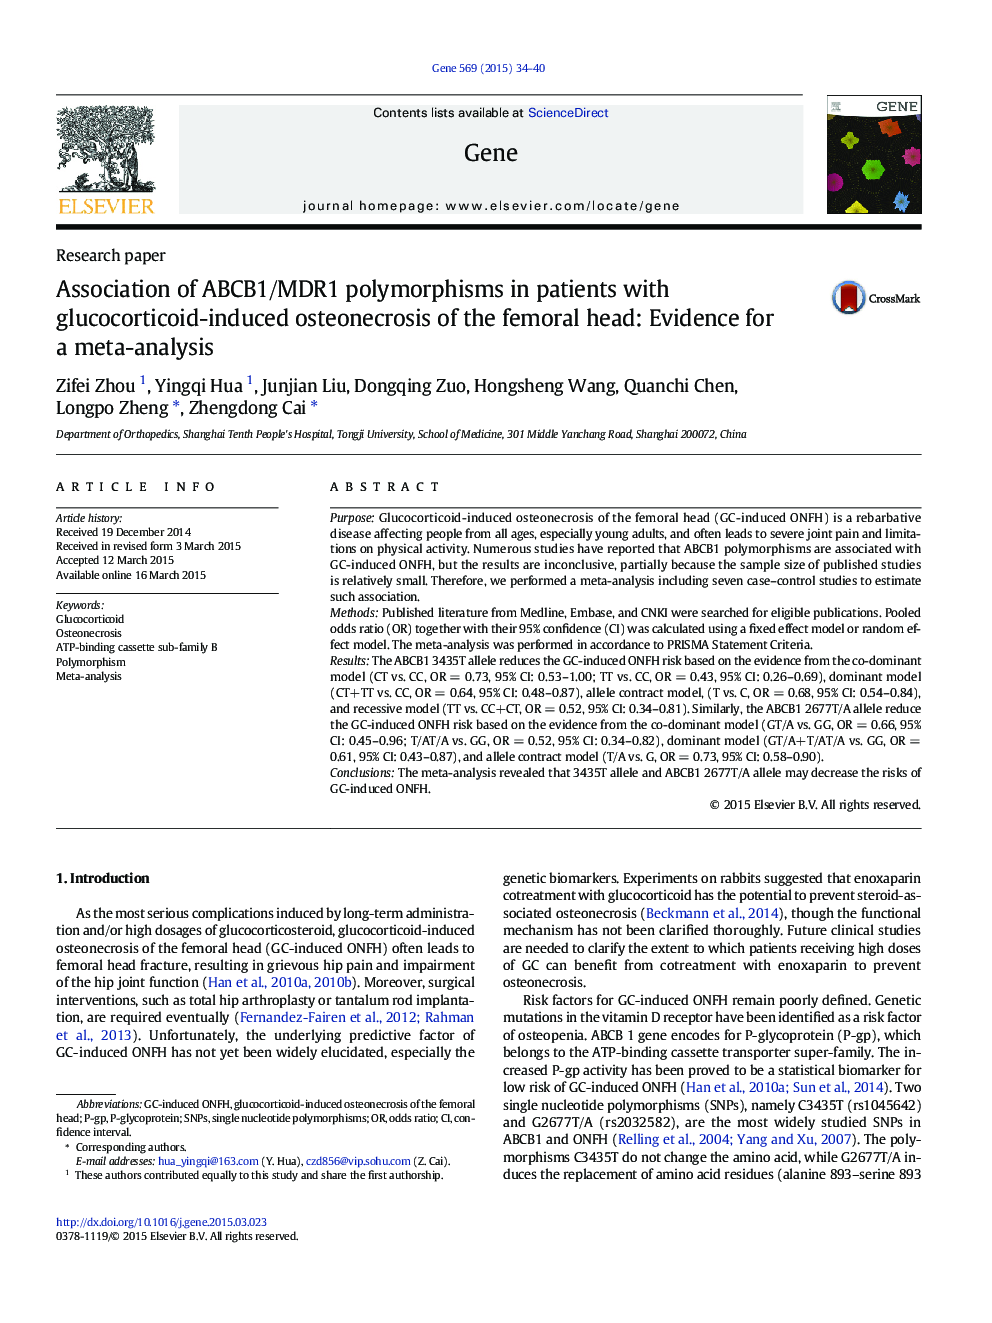 Association of ABCB1/MDR1 polymorphisms in patients with glucocorticoid-induced osteonecrosis of the femoral head: Evidence for a meta-analysis